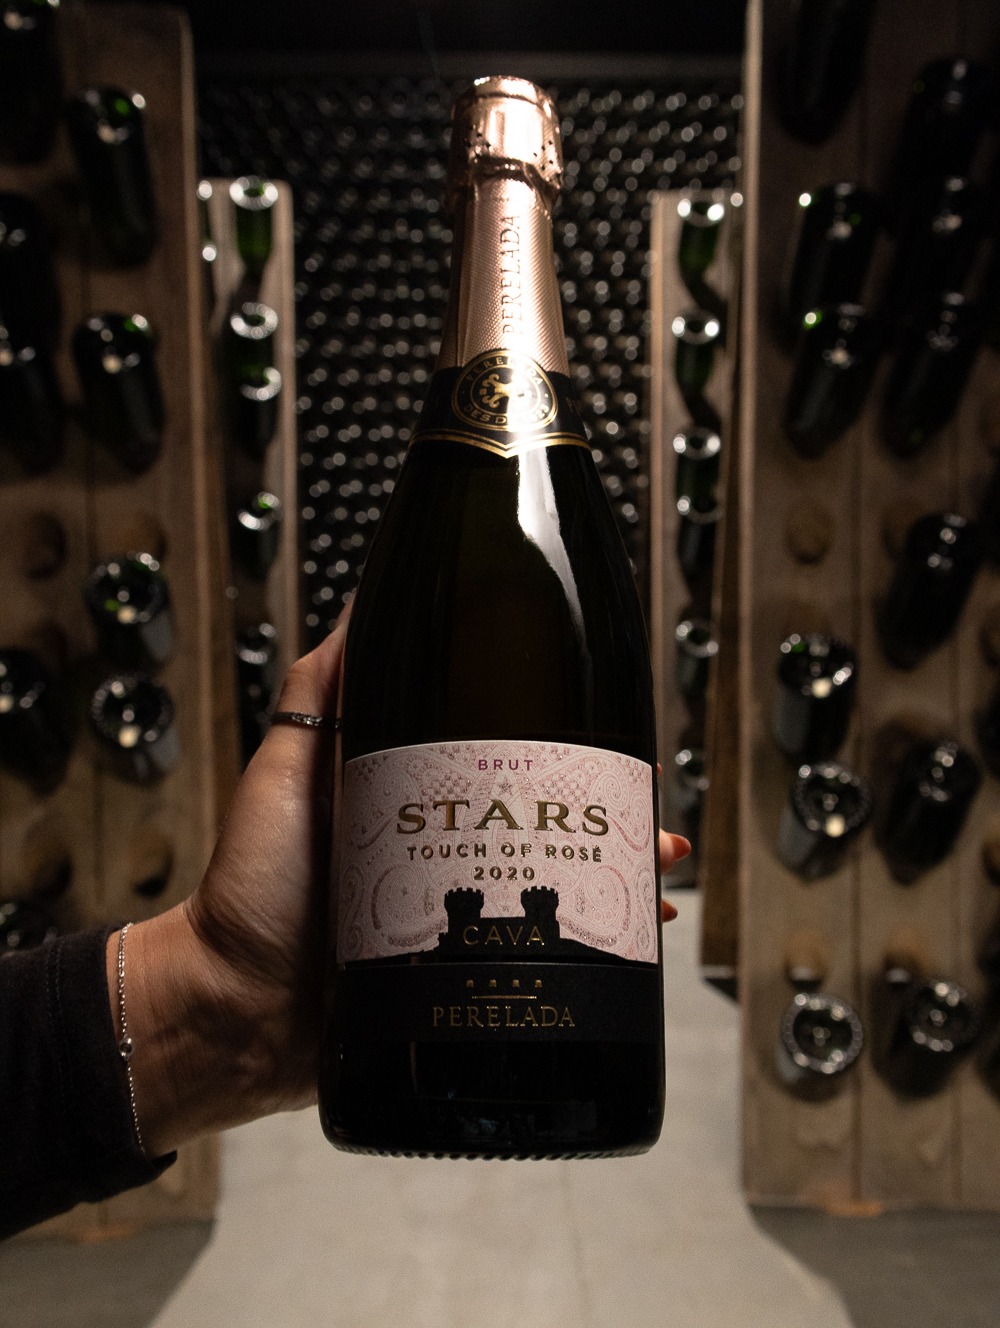 Perelada Cava Stars Touch of Rosé Brut 2020																	Bone-dry, wickedly flavorful Brut rosé that’ll leave you counting STARS!